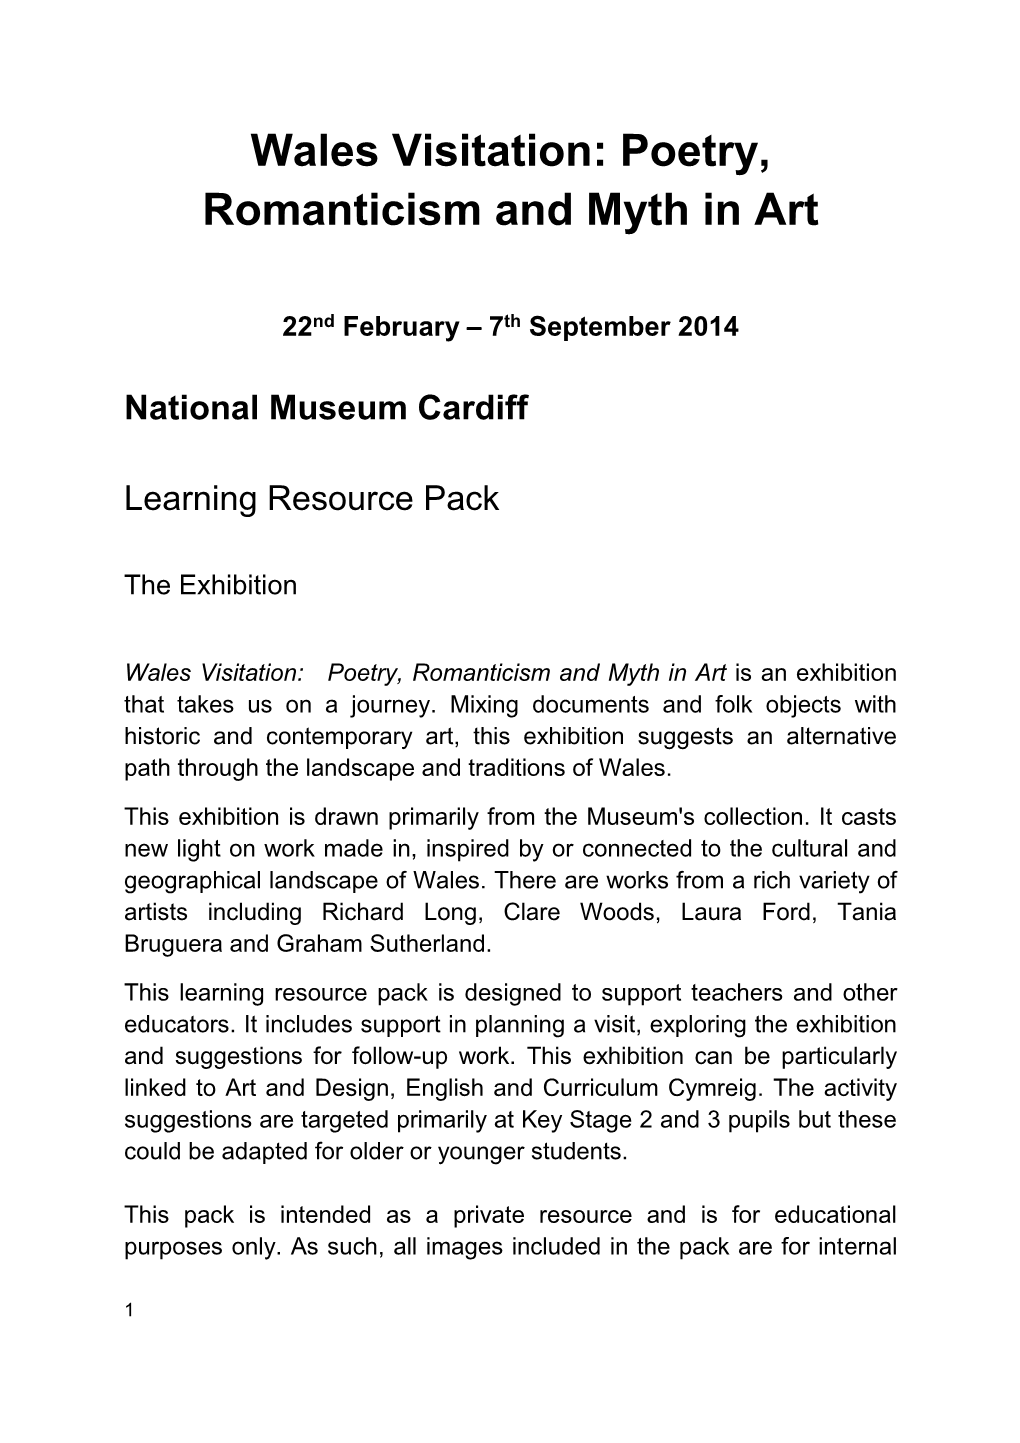 Wales Visitation: Poetry, Romanticism and Myth in Art